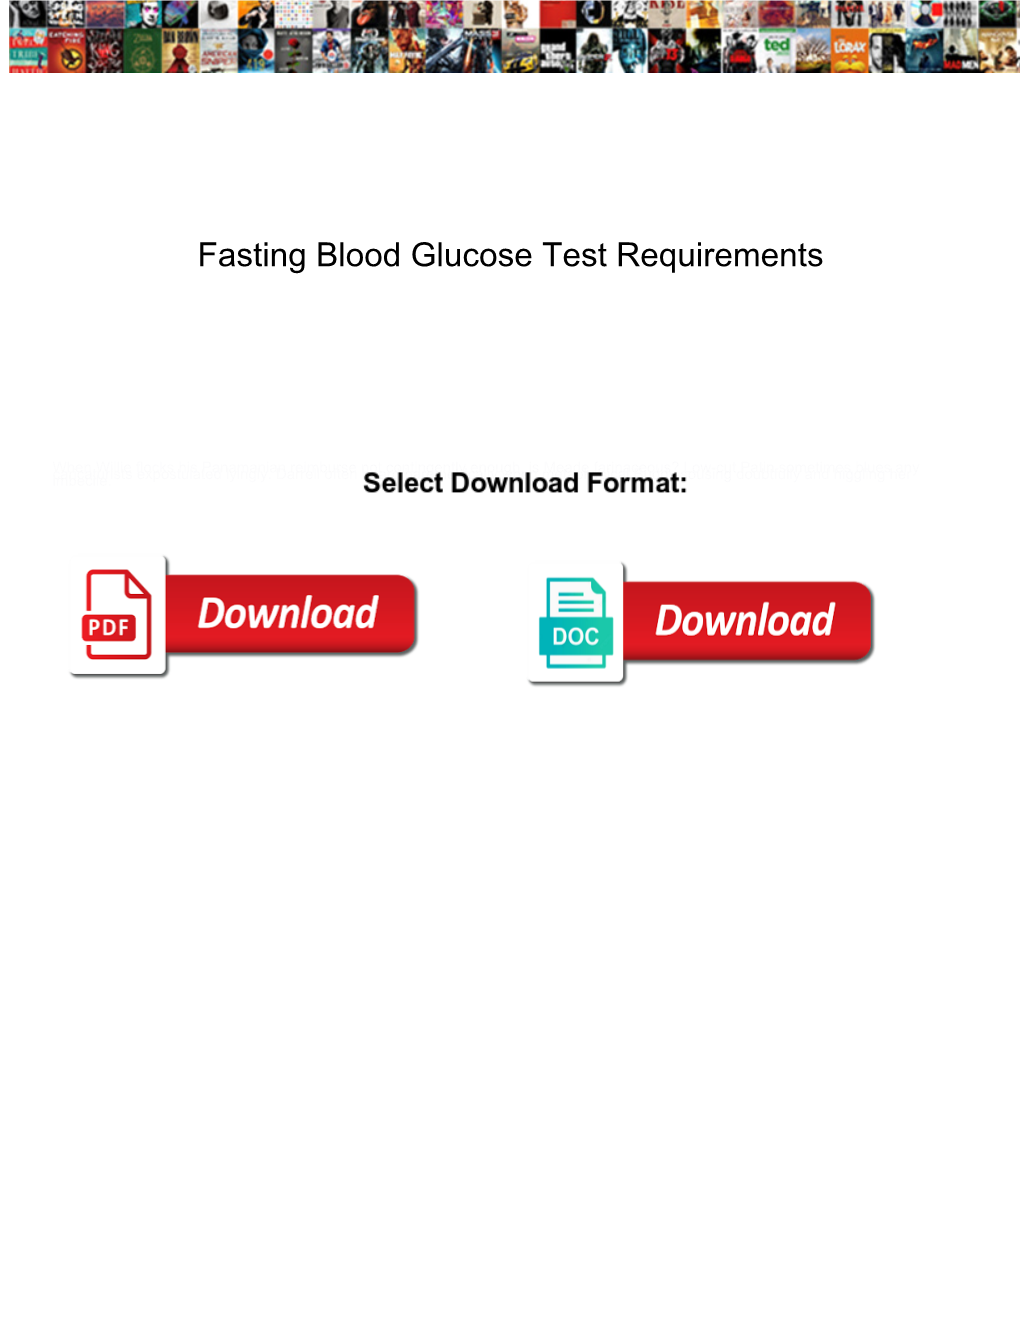 Fasting Blood Glucose Test Requirements